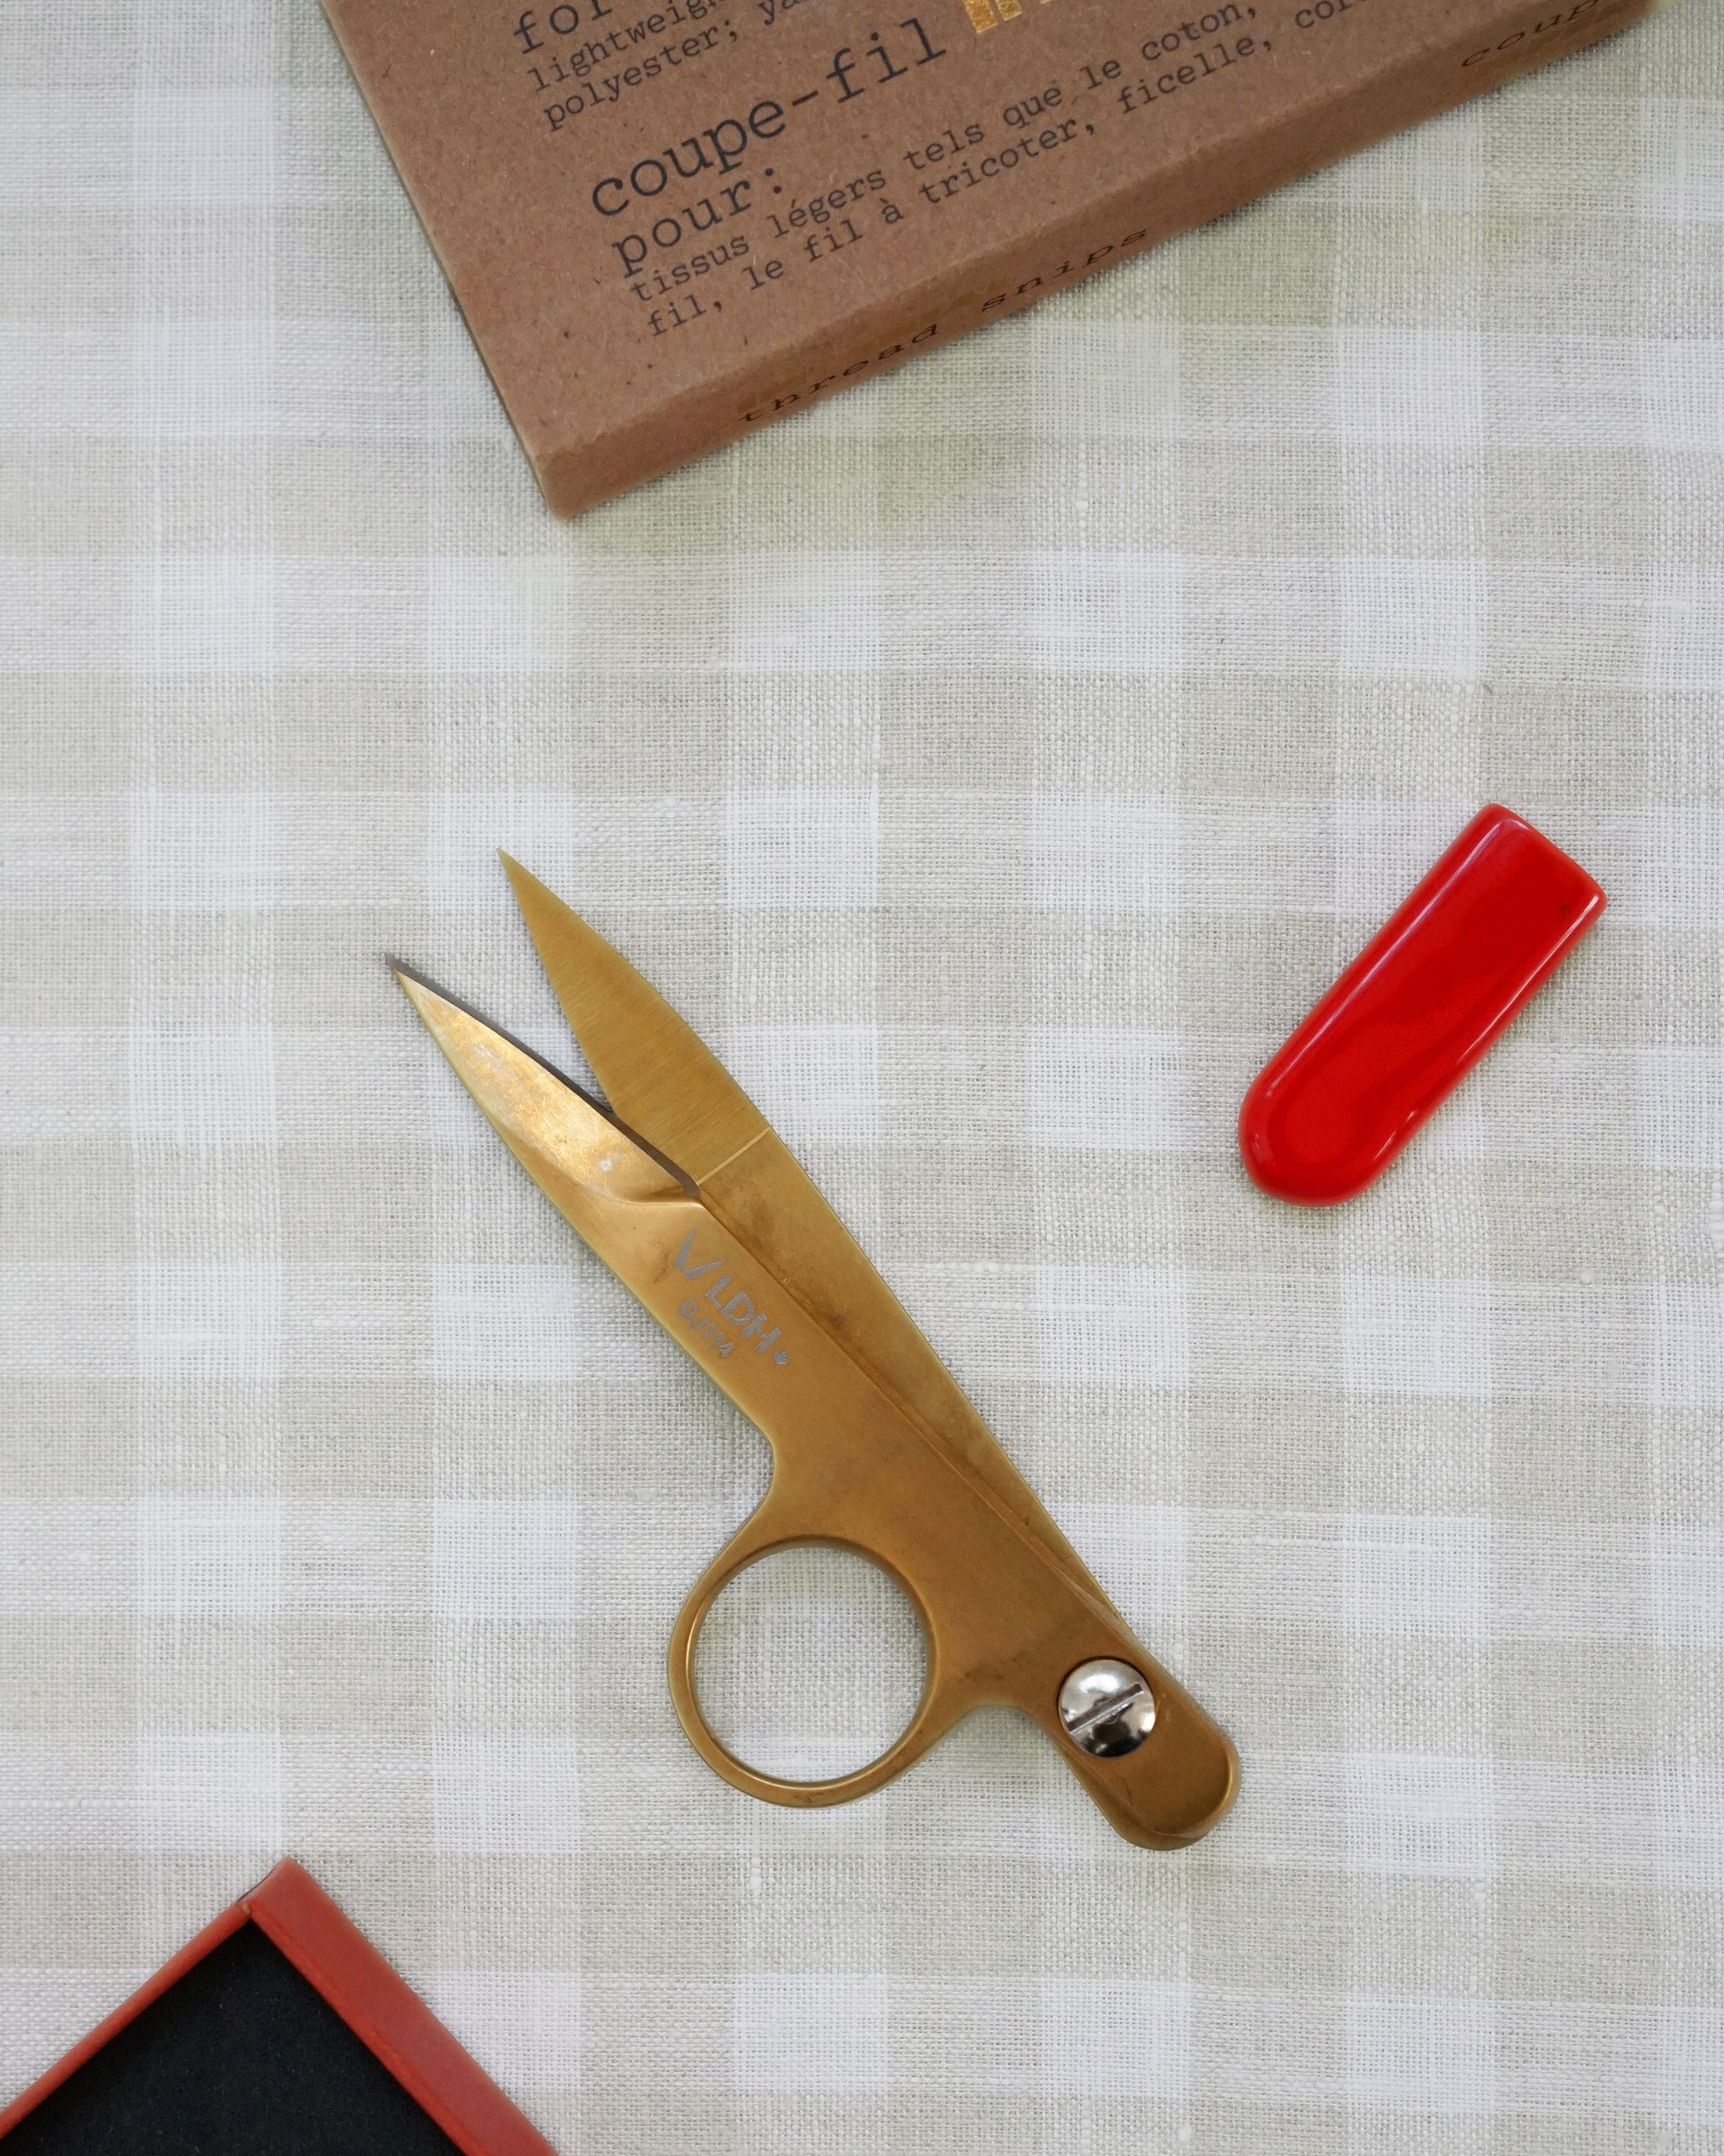 THREAD SNIPS Color: Gold Finish Snips / Scissors Quilting Sewing Crafts